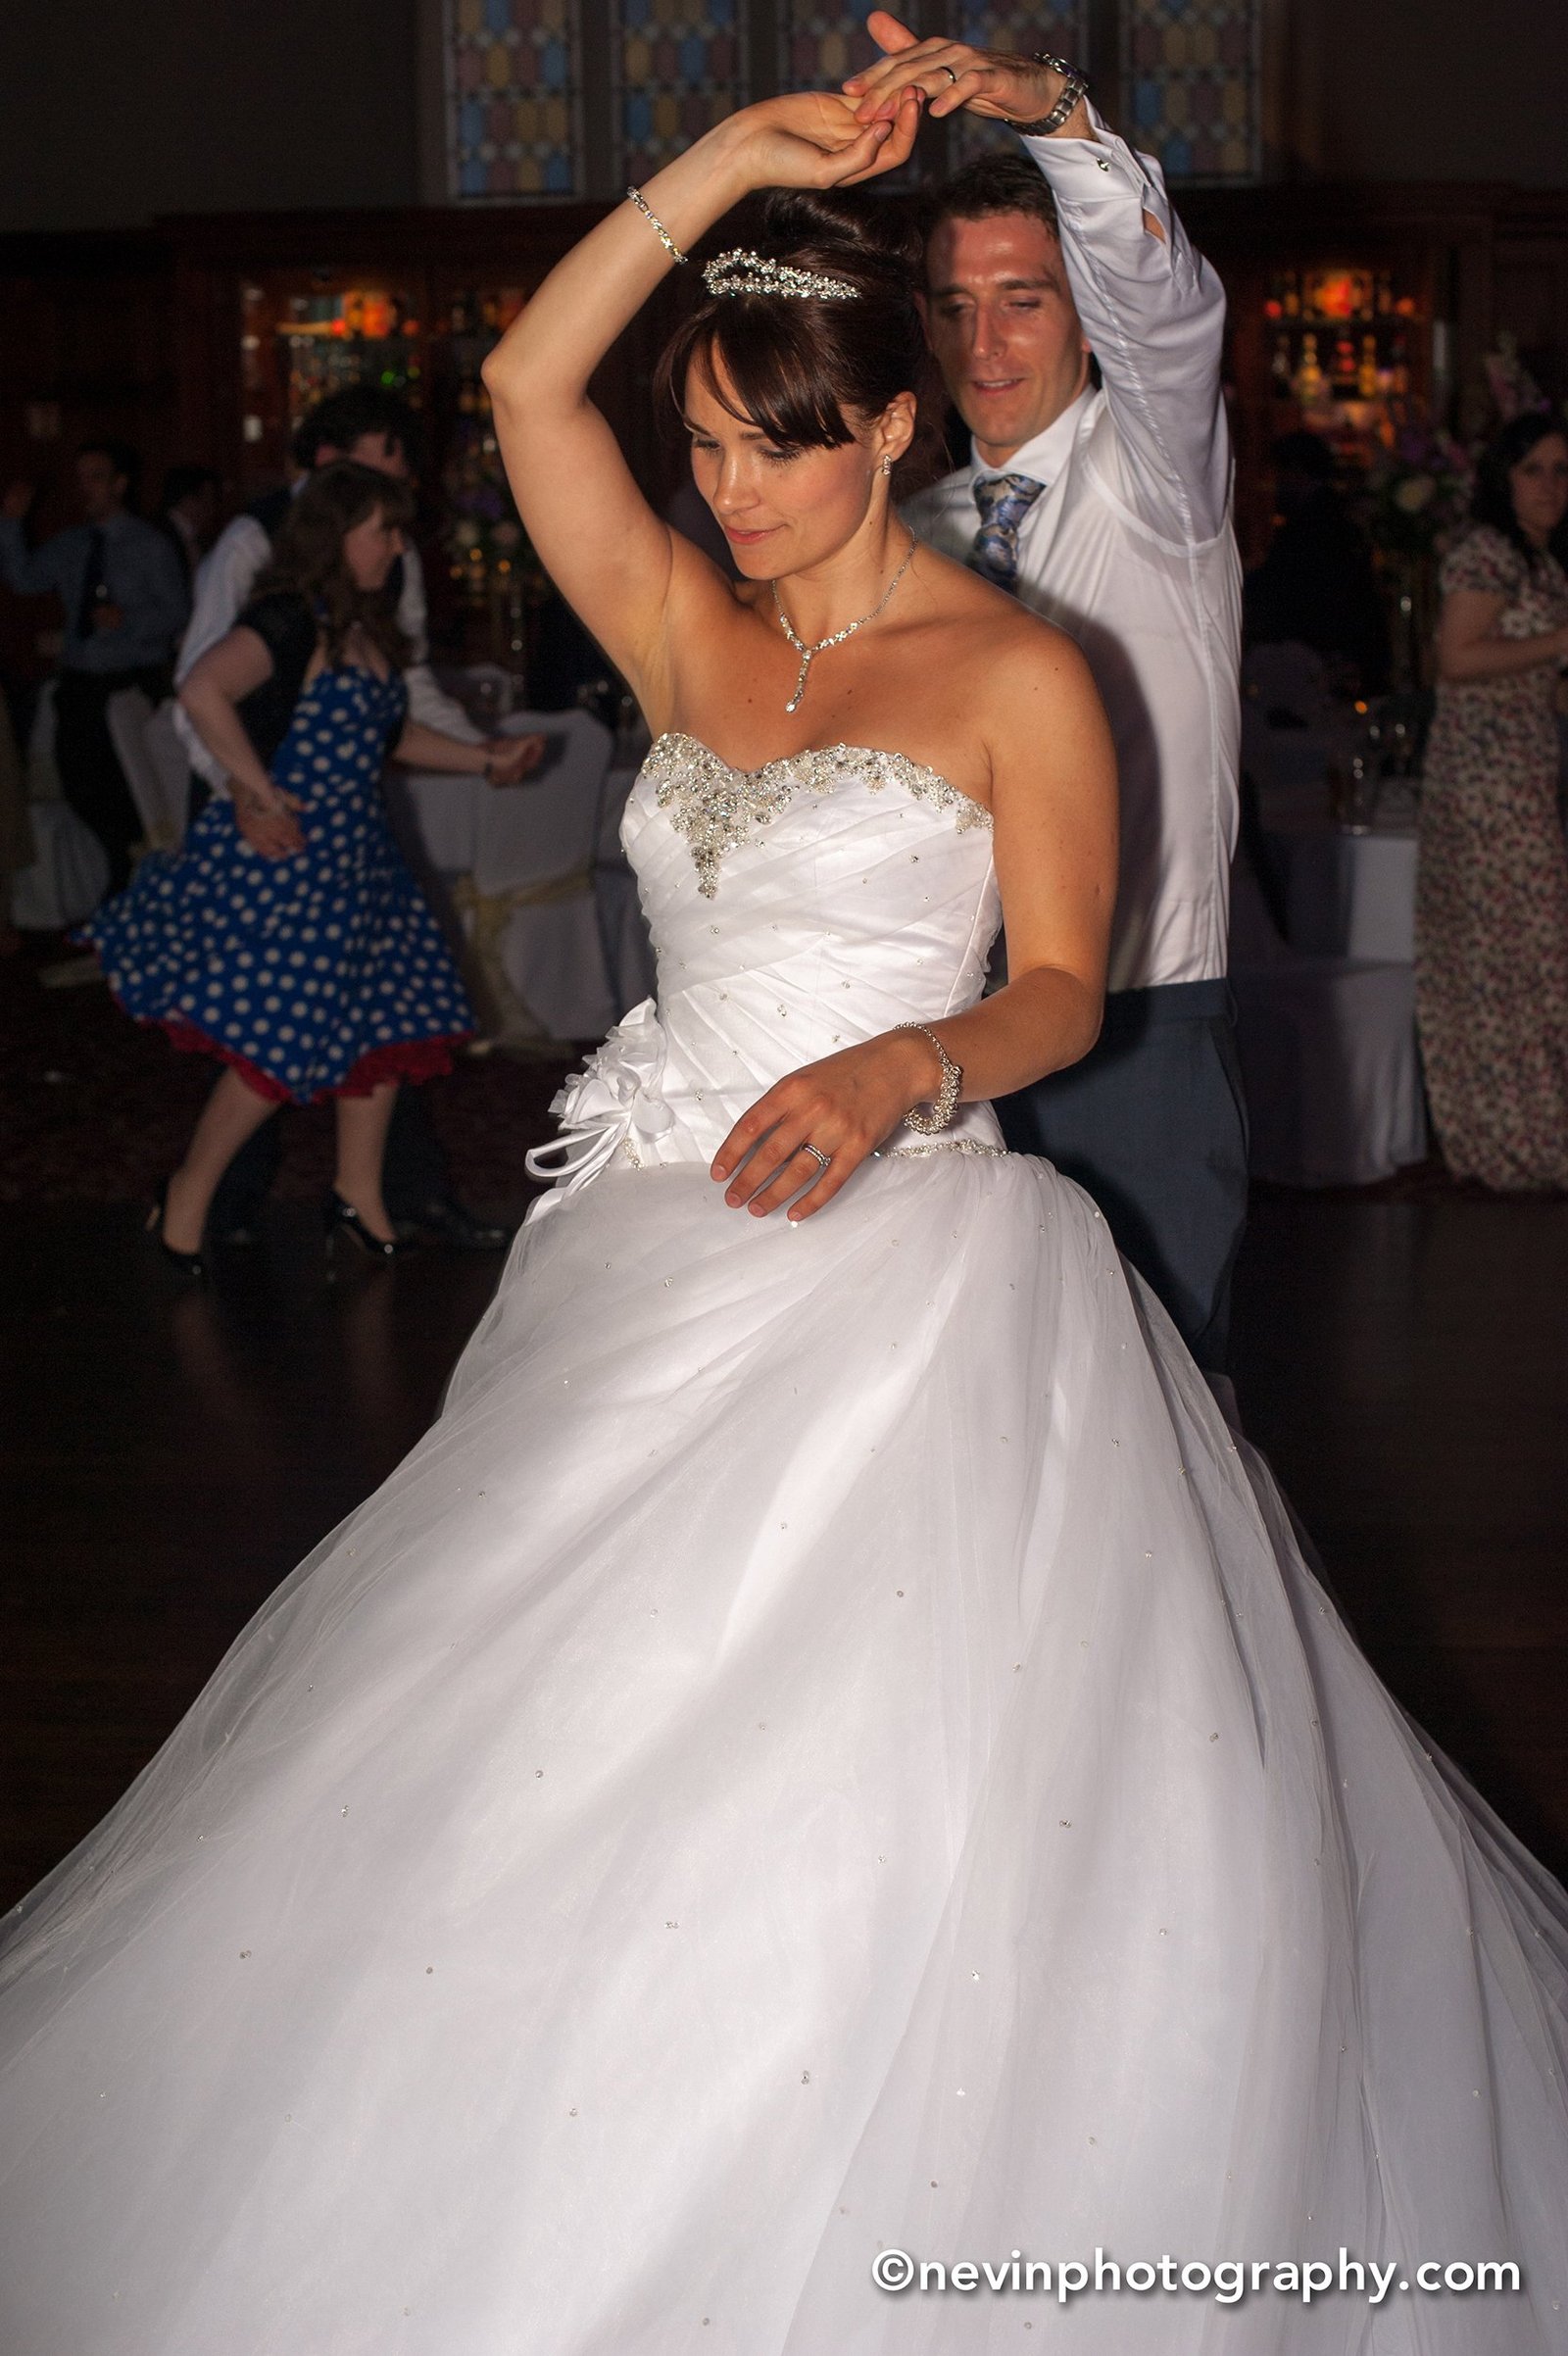 Swirling couple during dance as husband and wife